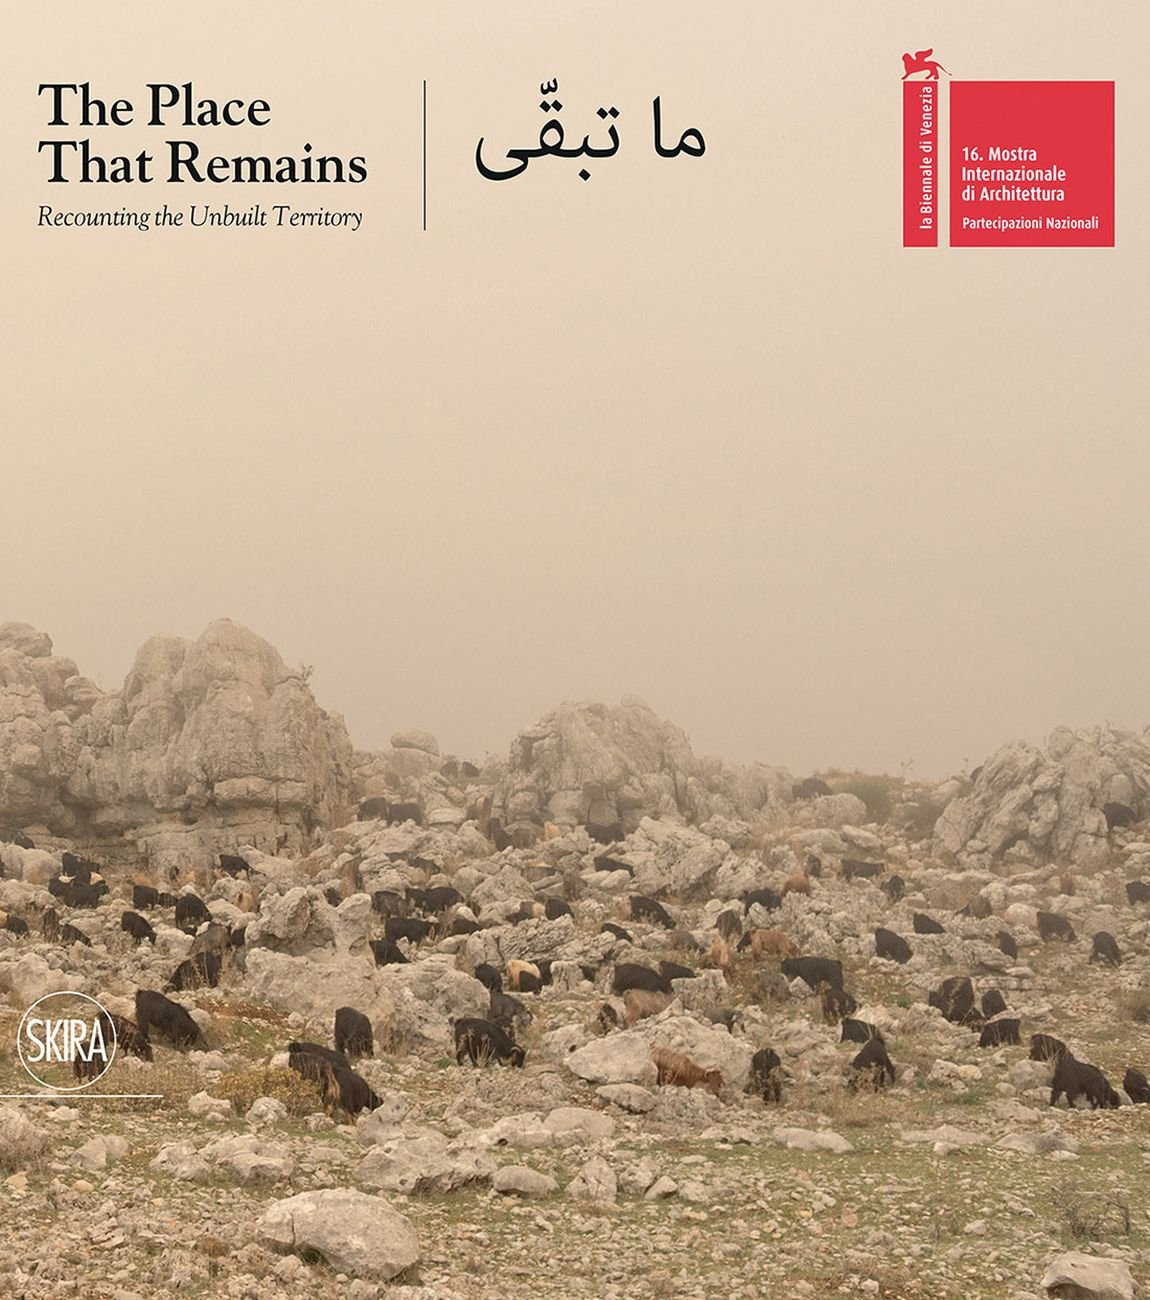 Hala Younes (a cura di) – The Place that Remains. Recounting the Unbuilt Territory (Skira, Milano 2018)